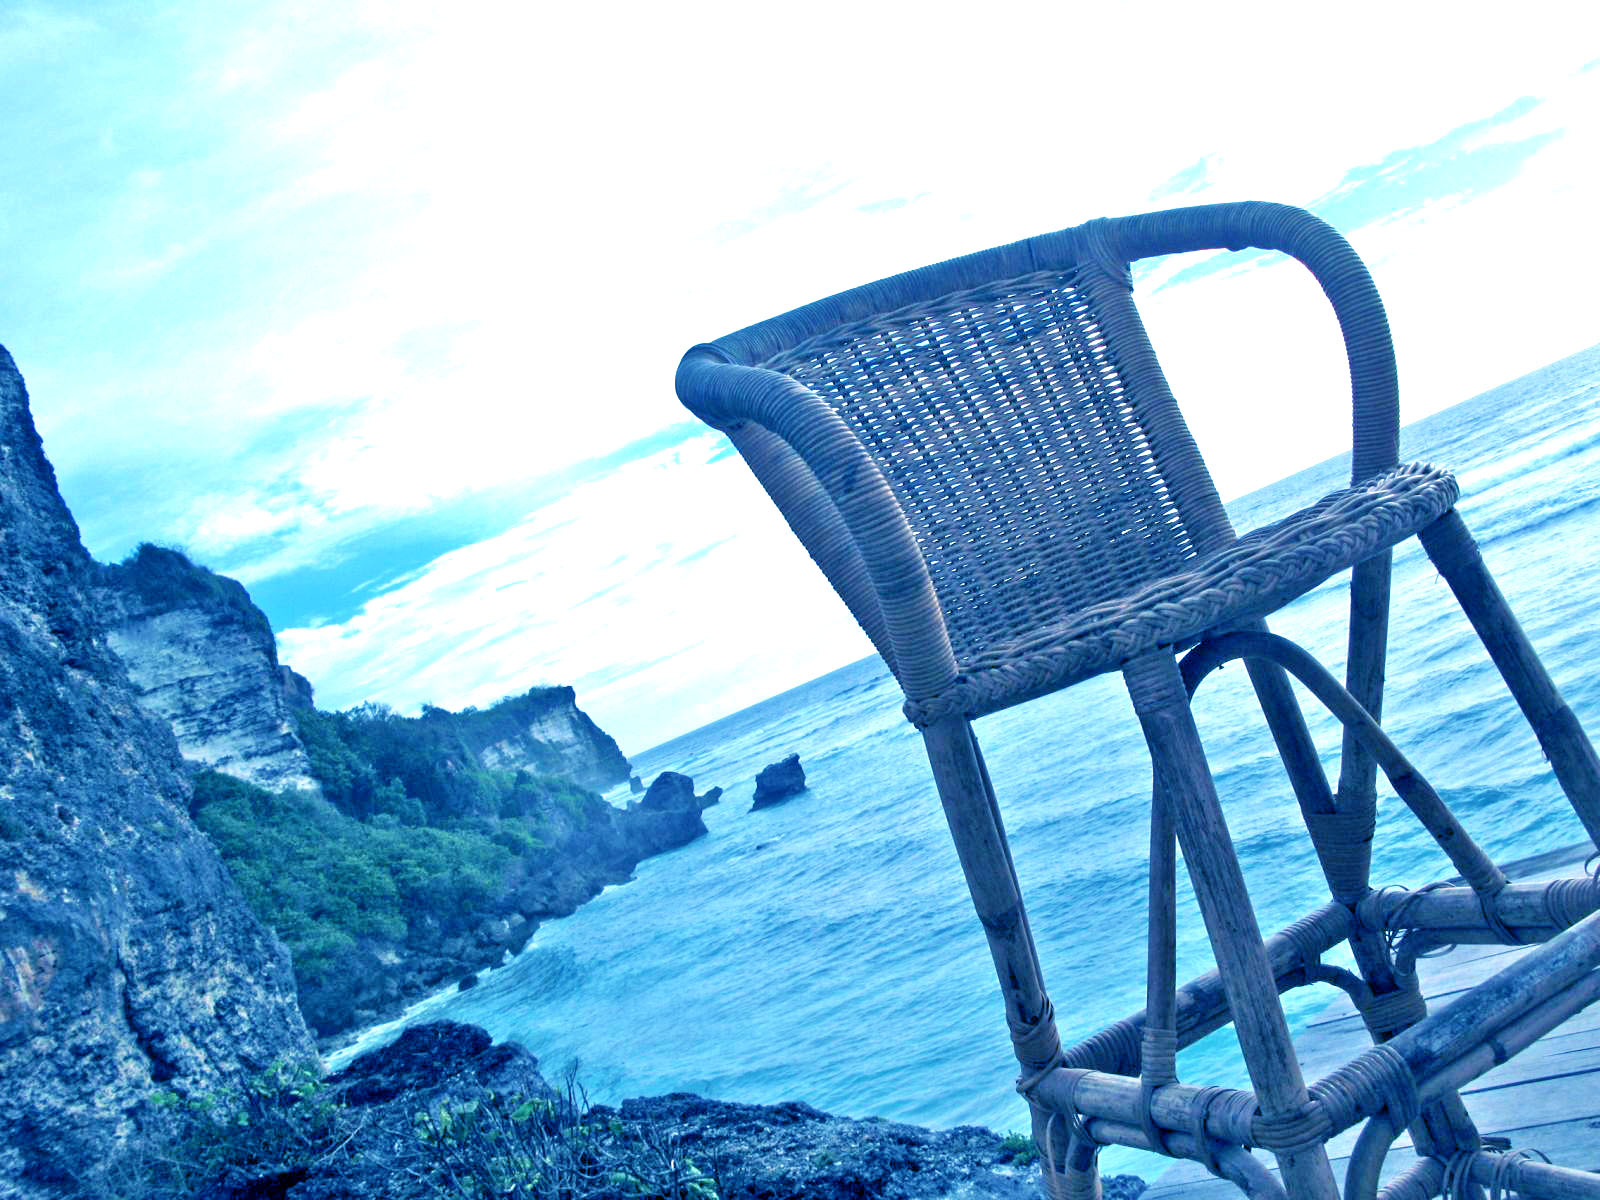 The chair above the sea photo